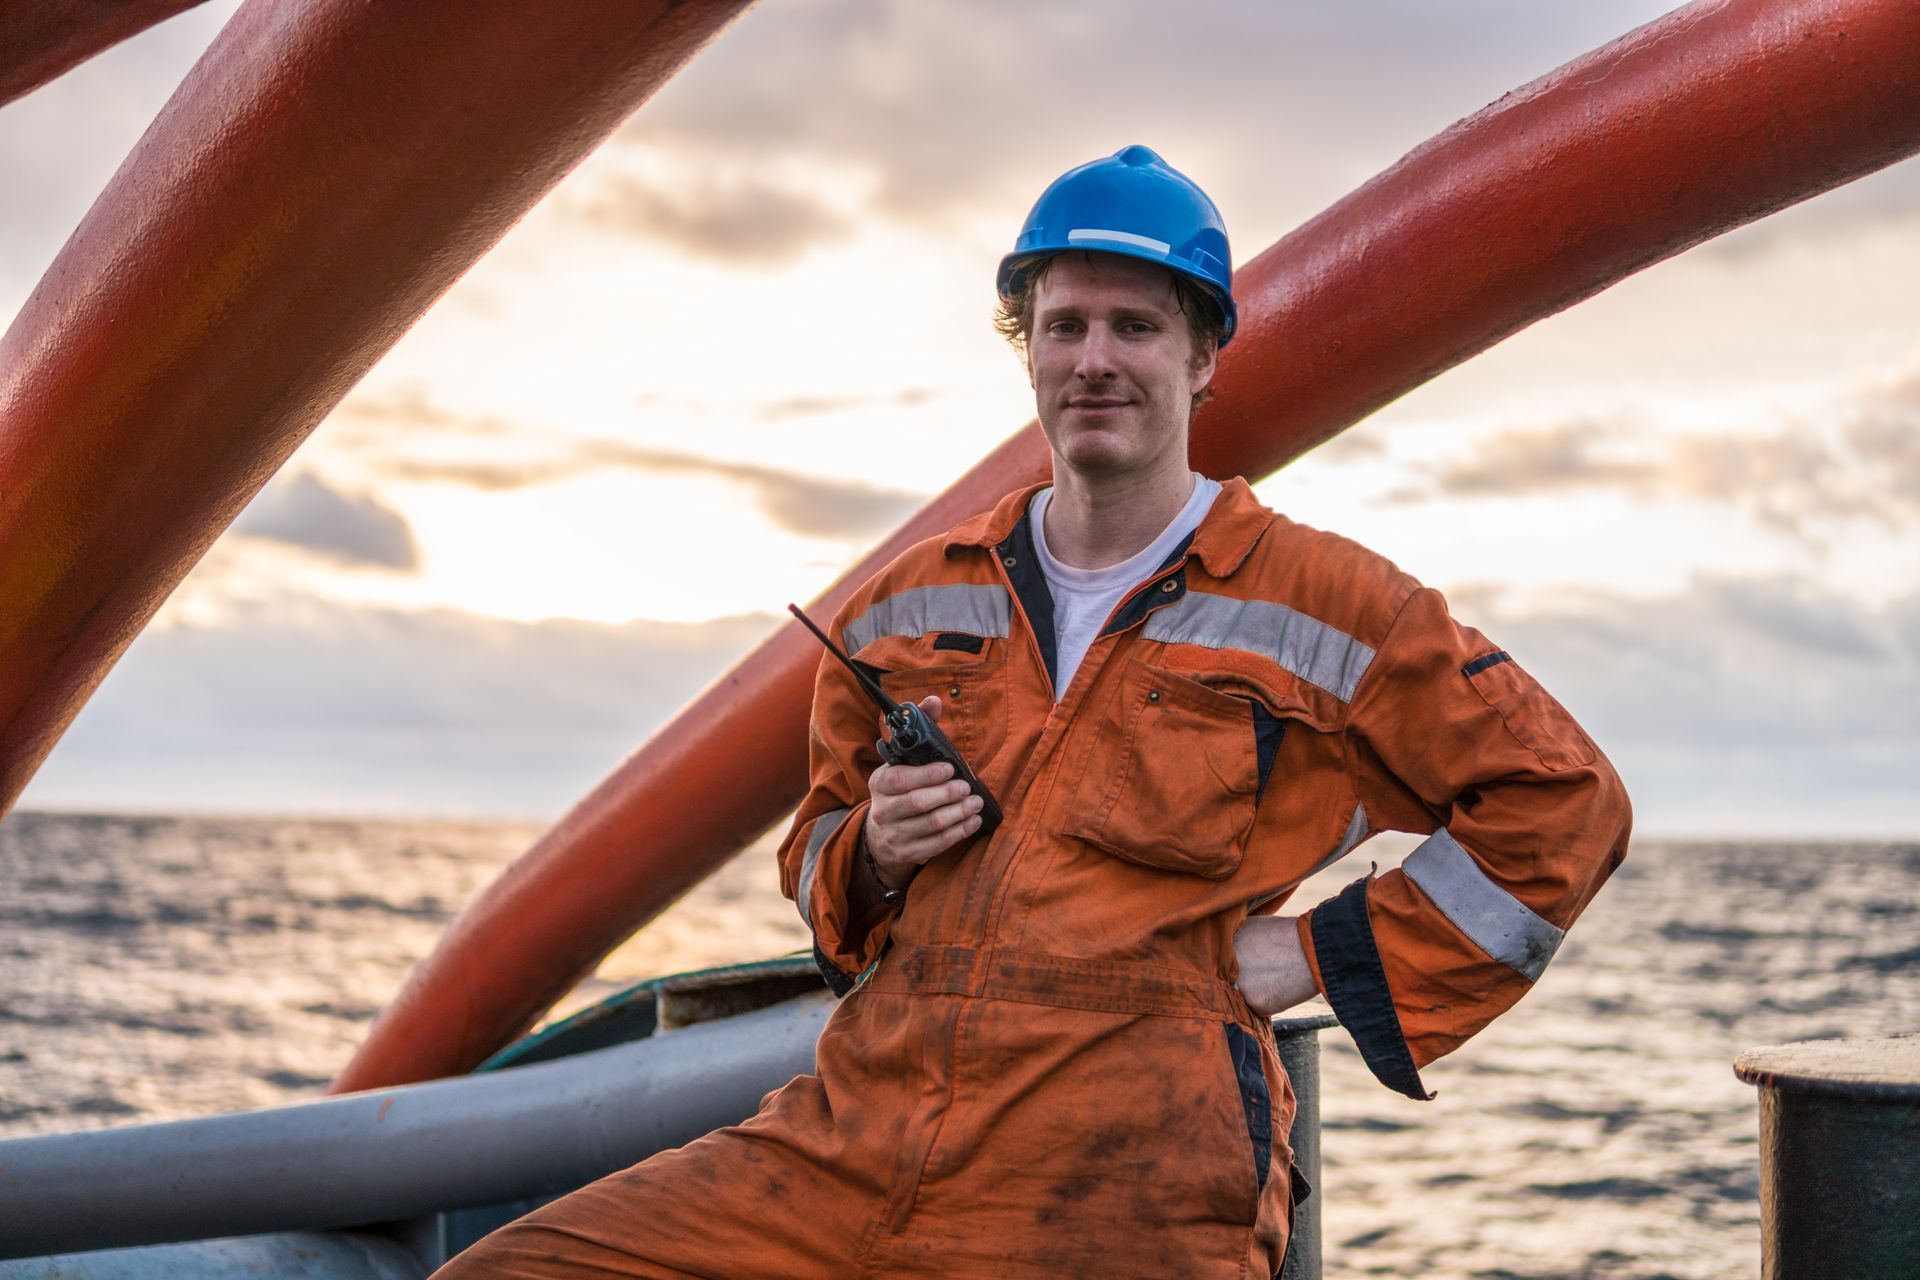 Confident maritime crew member in orange overalls and blue helmet holding a walkie-talkie on the ship deck at dawn.